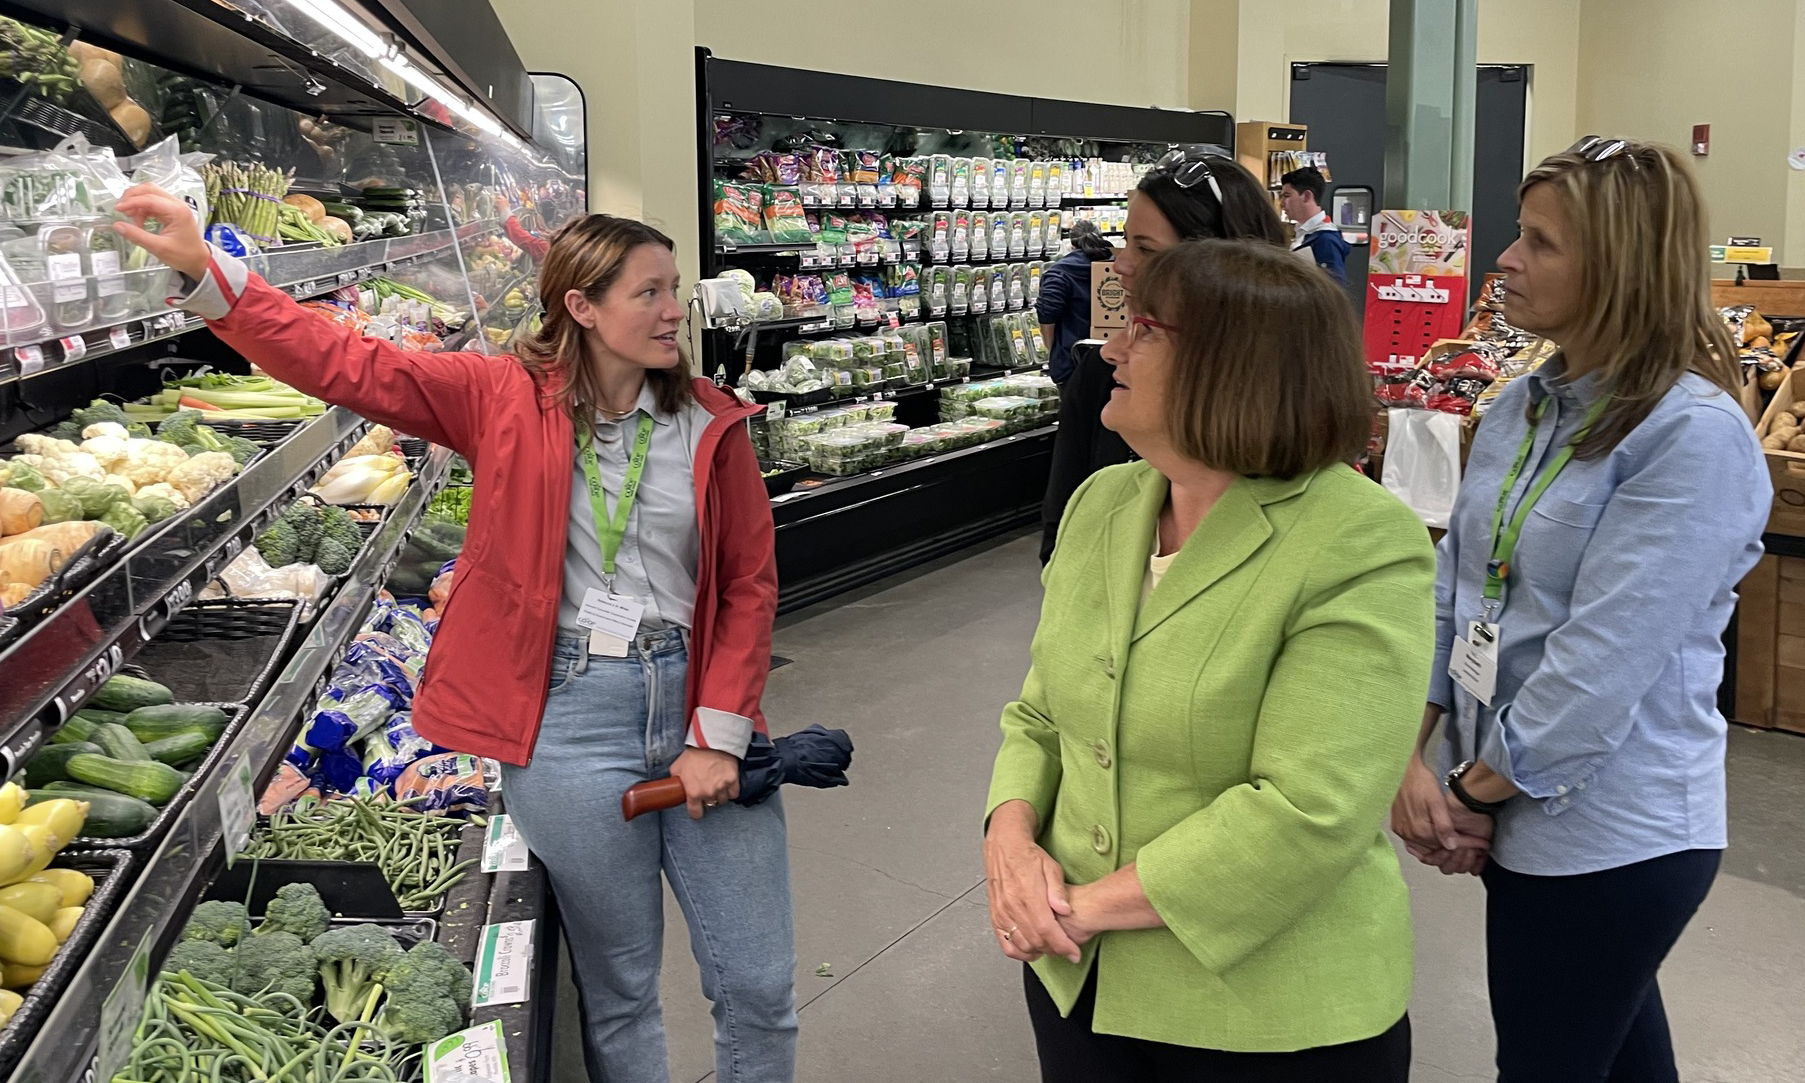 Rebecca J. H. White (left) of the Hanover Co-op touts the critical importance small producers such as Omnipotent Greens of Lebanon, NH have in building local food security. Omnipotent Greens provides micro-greens to Hanover Co-op shoppers and is a vendor at area farmers markets. (Also shown, Rep. Kuster, center; Co-op GM Amanda Charland, back; Lebanon store manager, Marybeth Fenton, right.) https://omnipotenthorticulture.com/